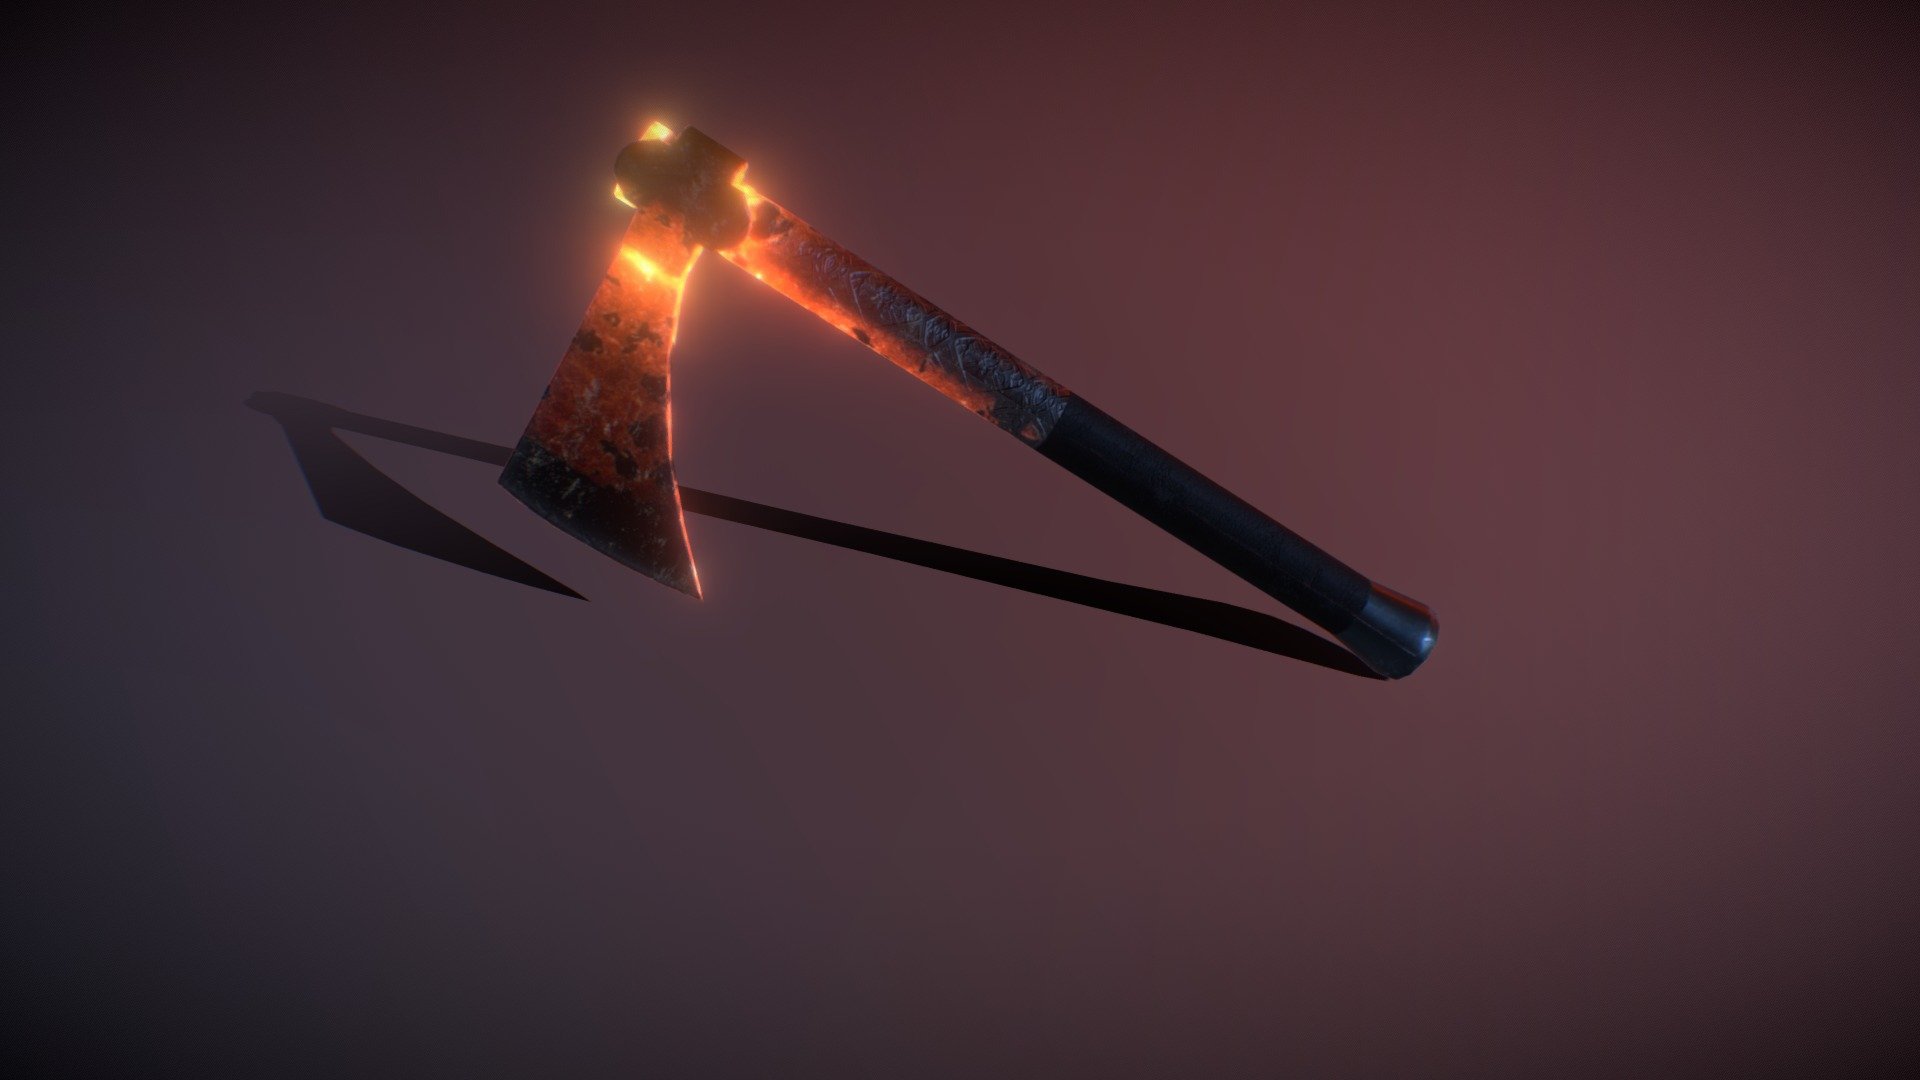 This is a Lava Axe with an overwhelmingly strong heat coming from its core.
Feedback would be appreciated 3d model